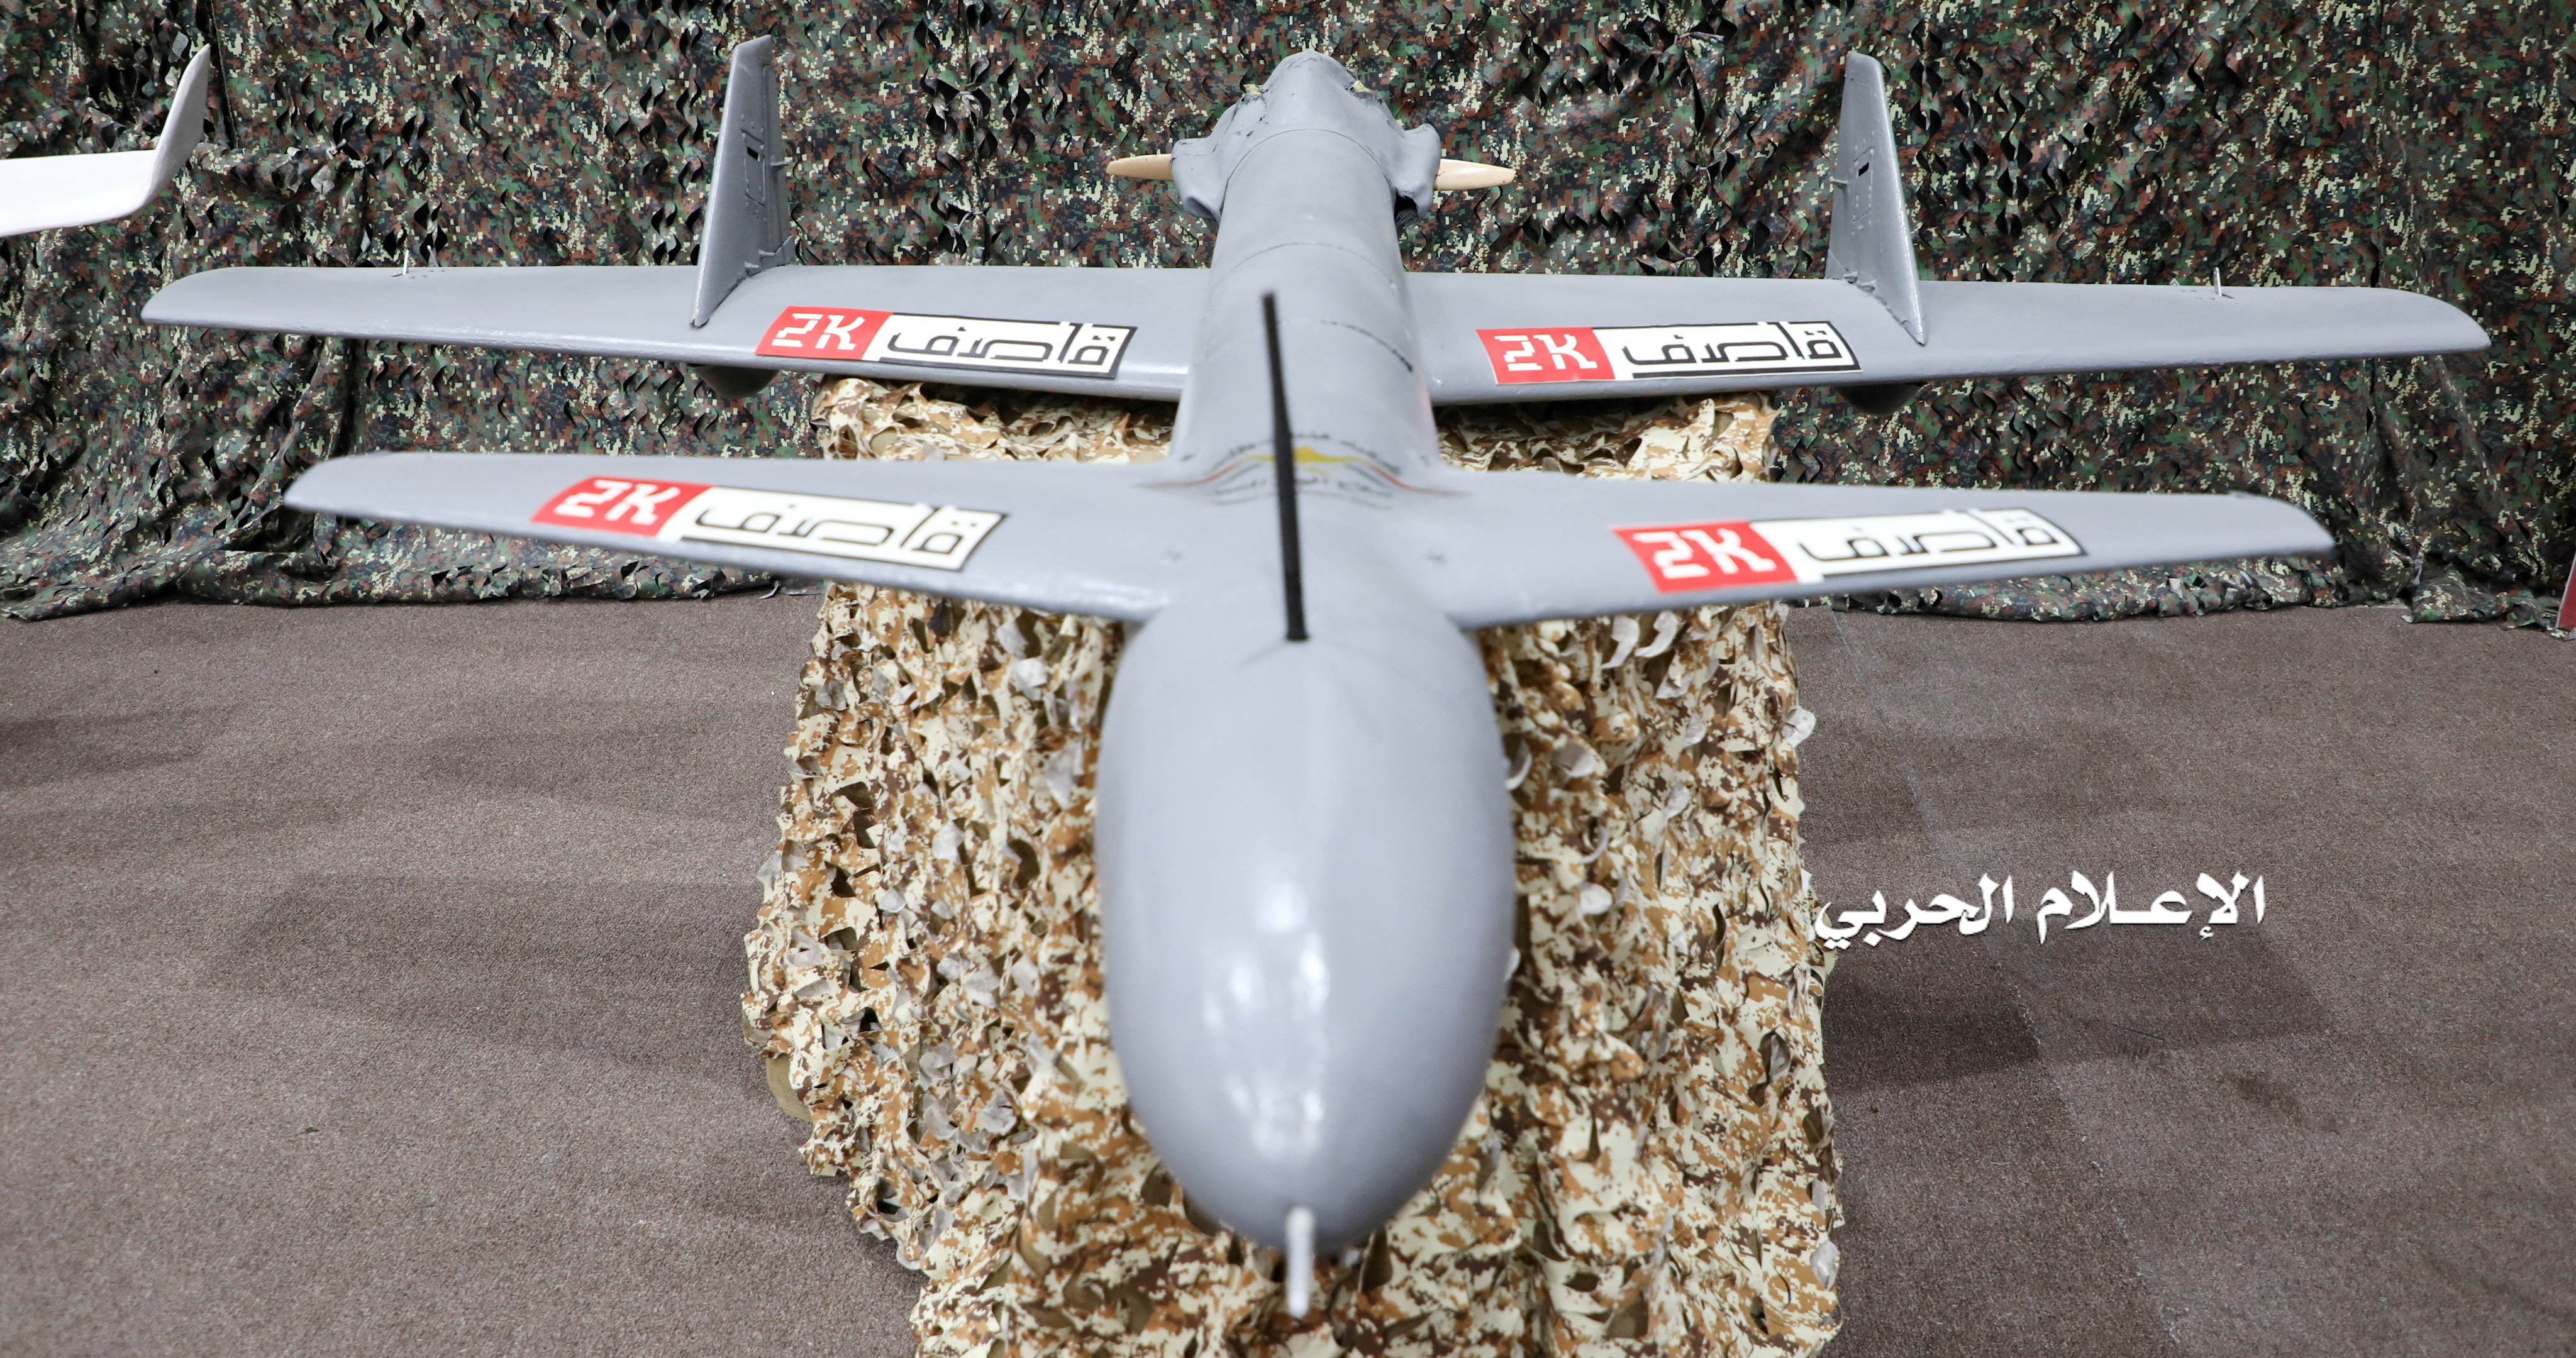 Drone aircraft on display at an exhibition at an unidentified location in Yemen